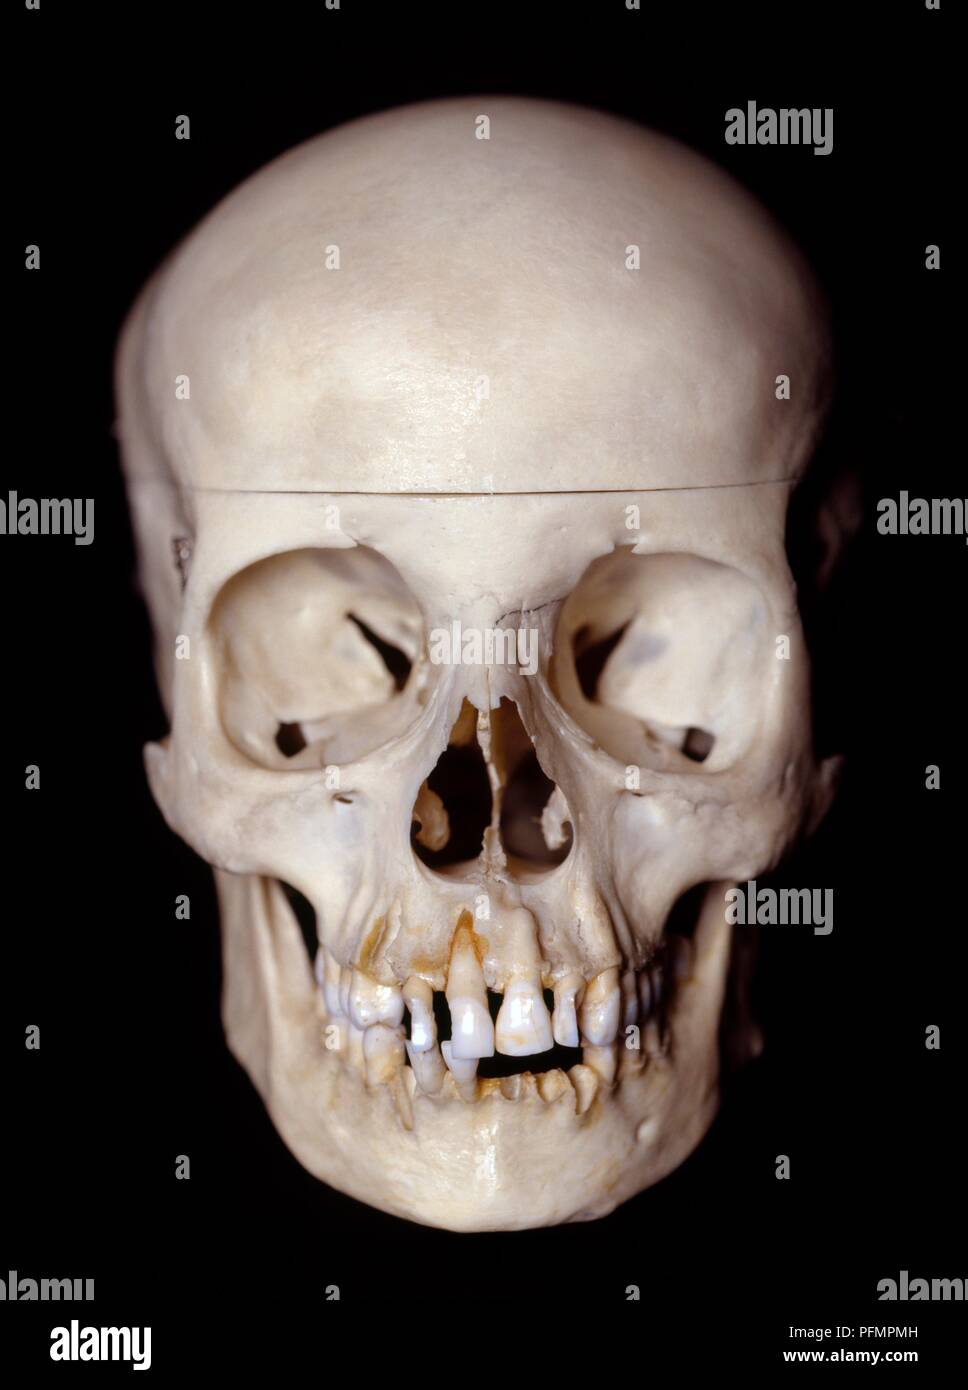 Female skull, front view Stock Photo